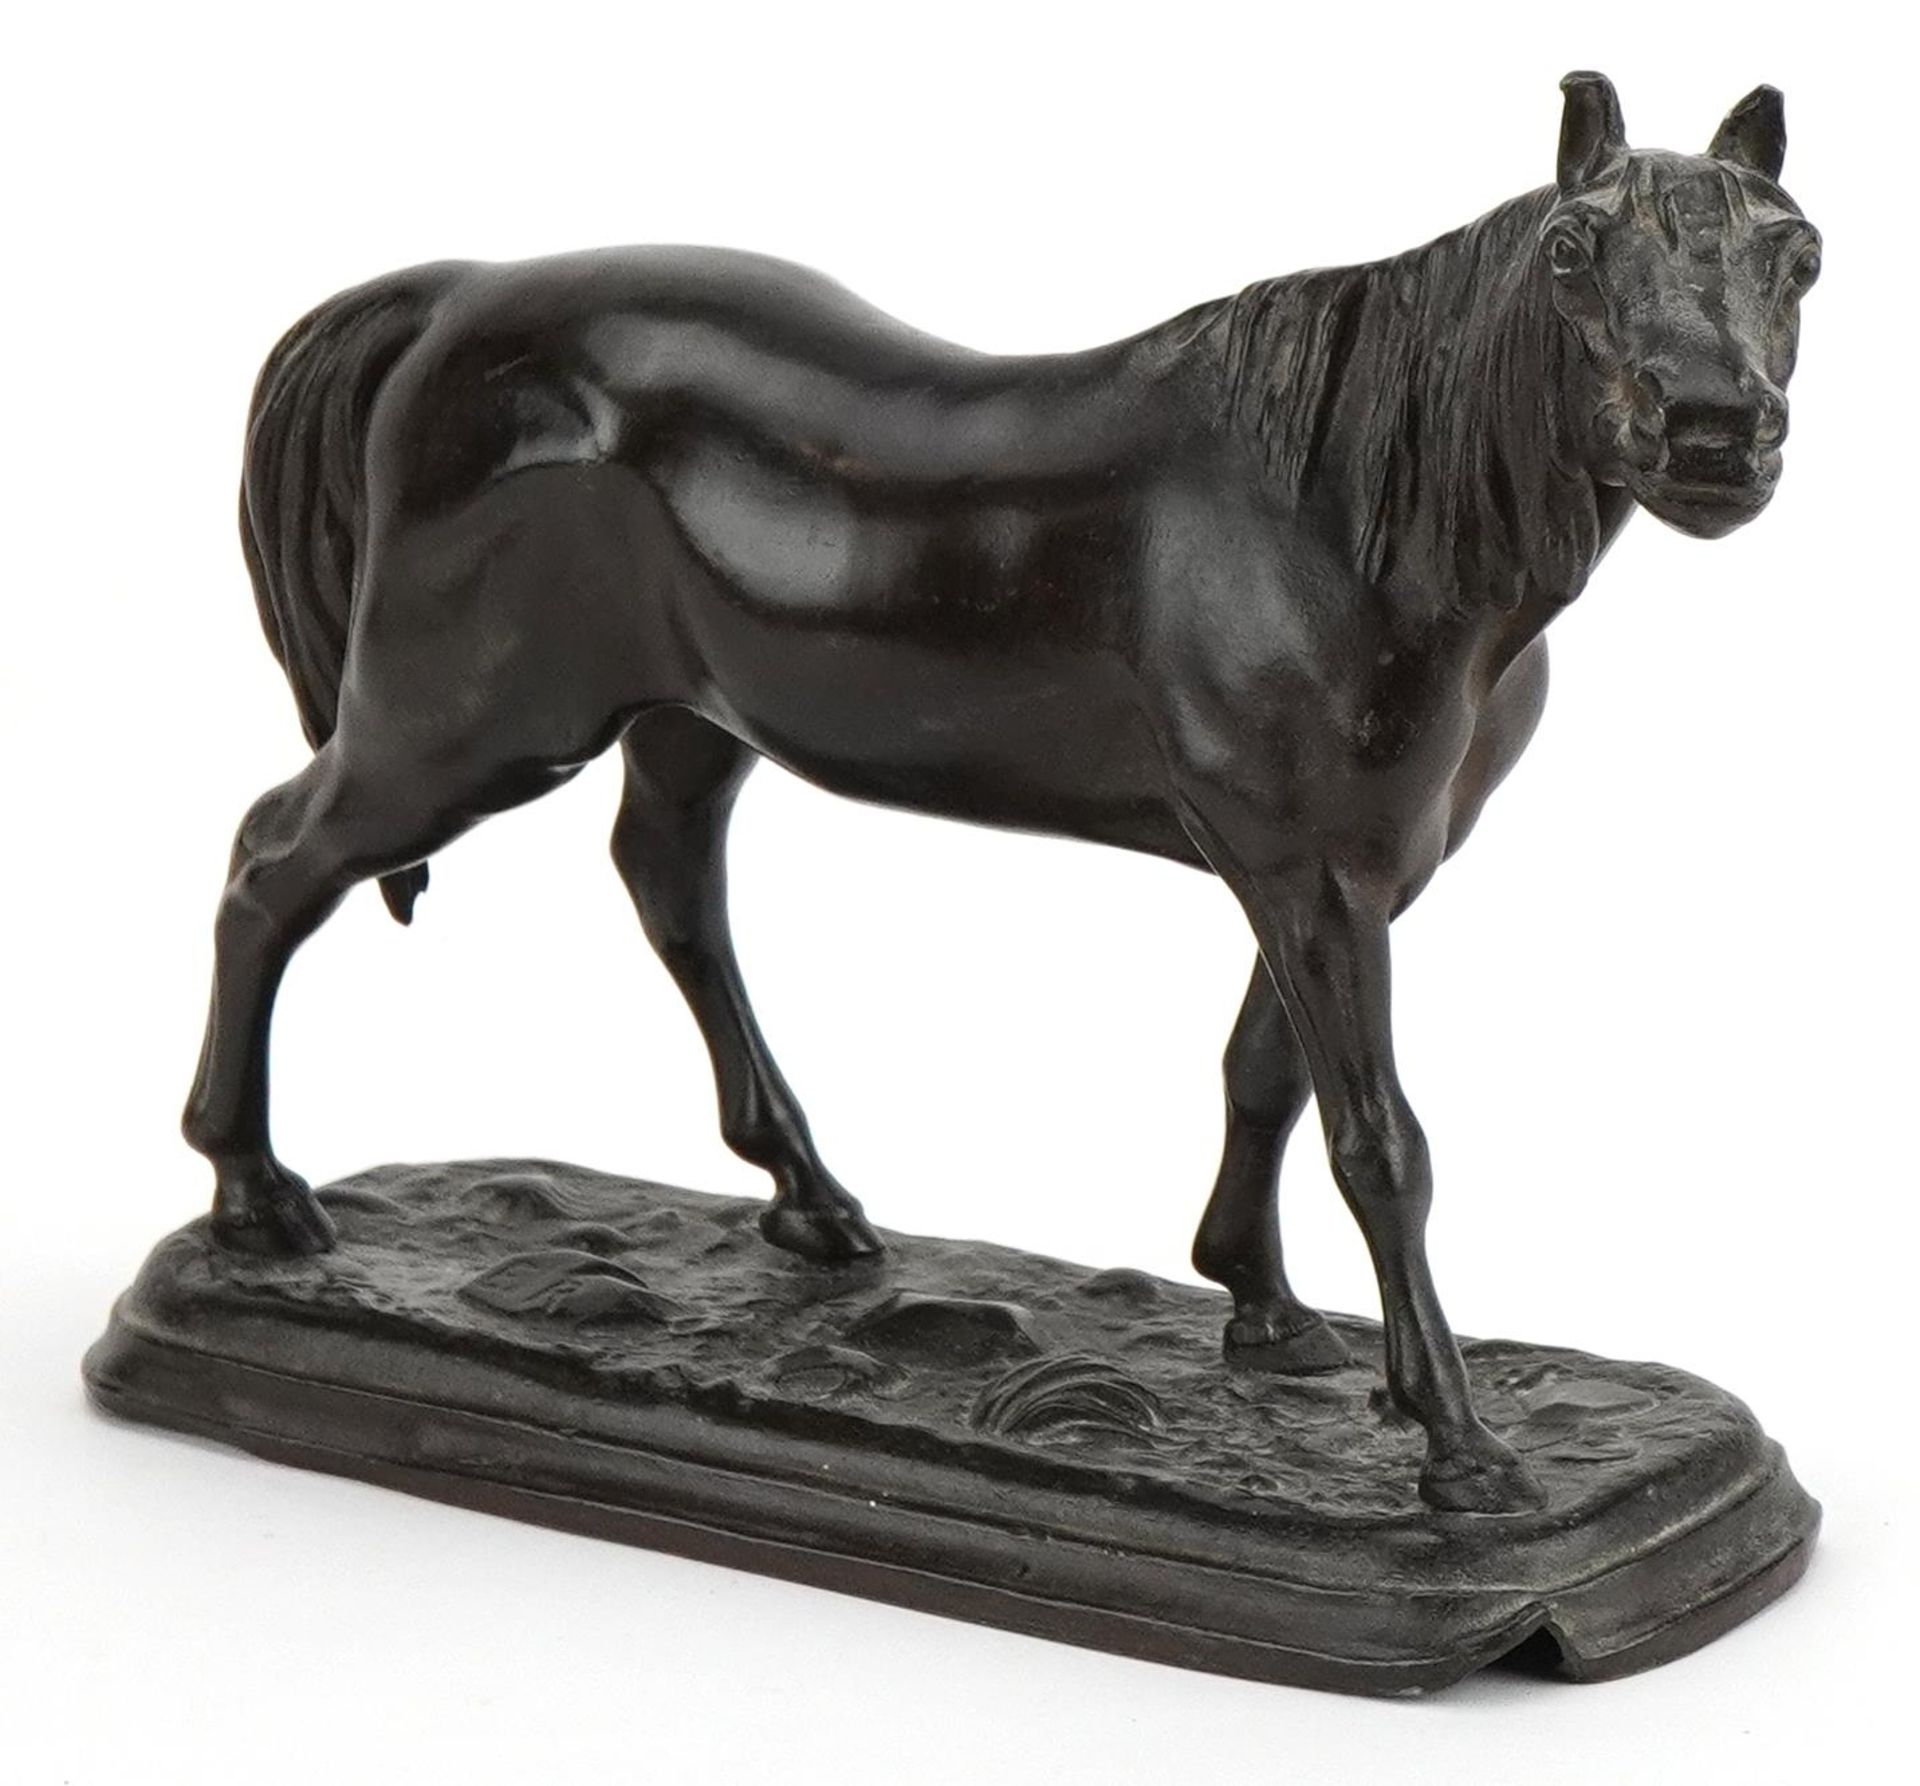 Patinated spelter horse impressed ER, 19cm in length : For further information on this lot please